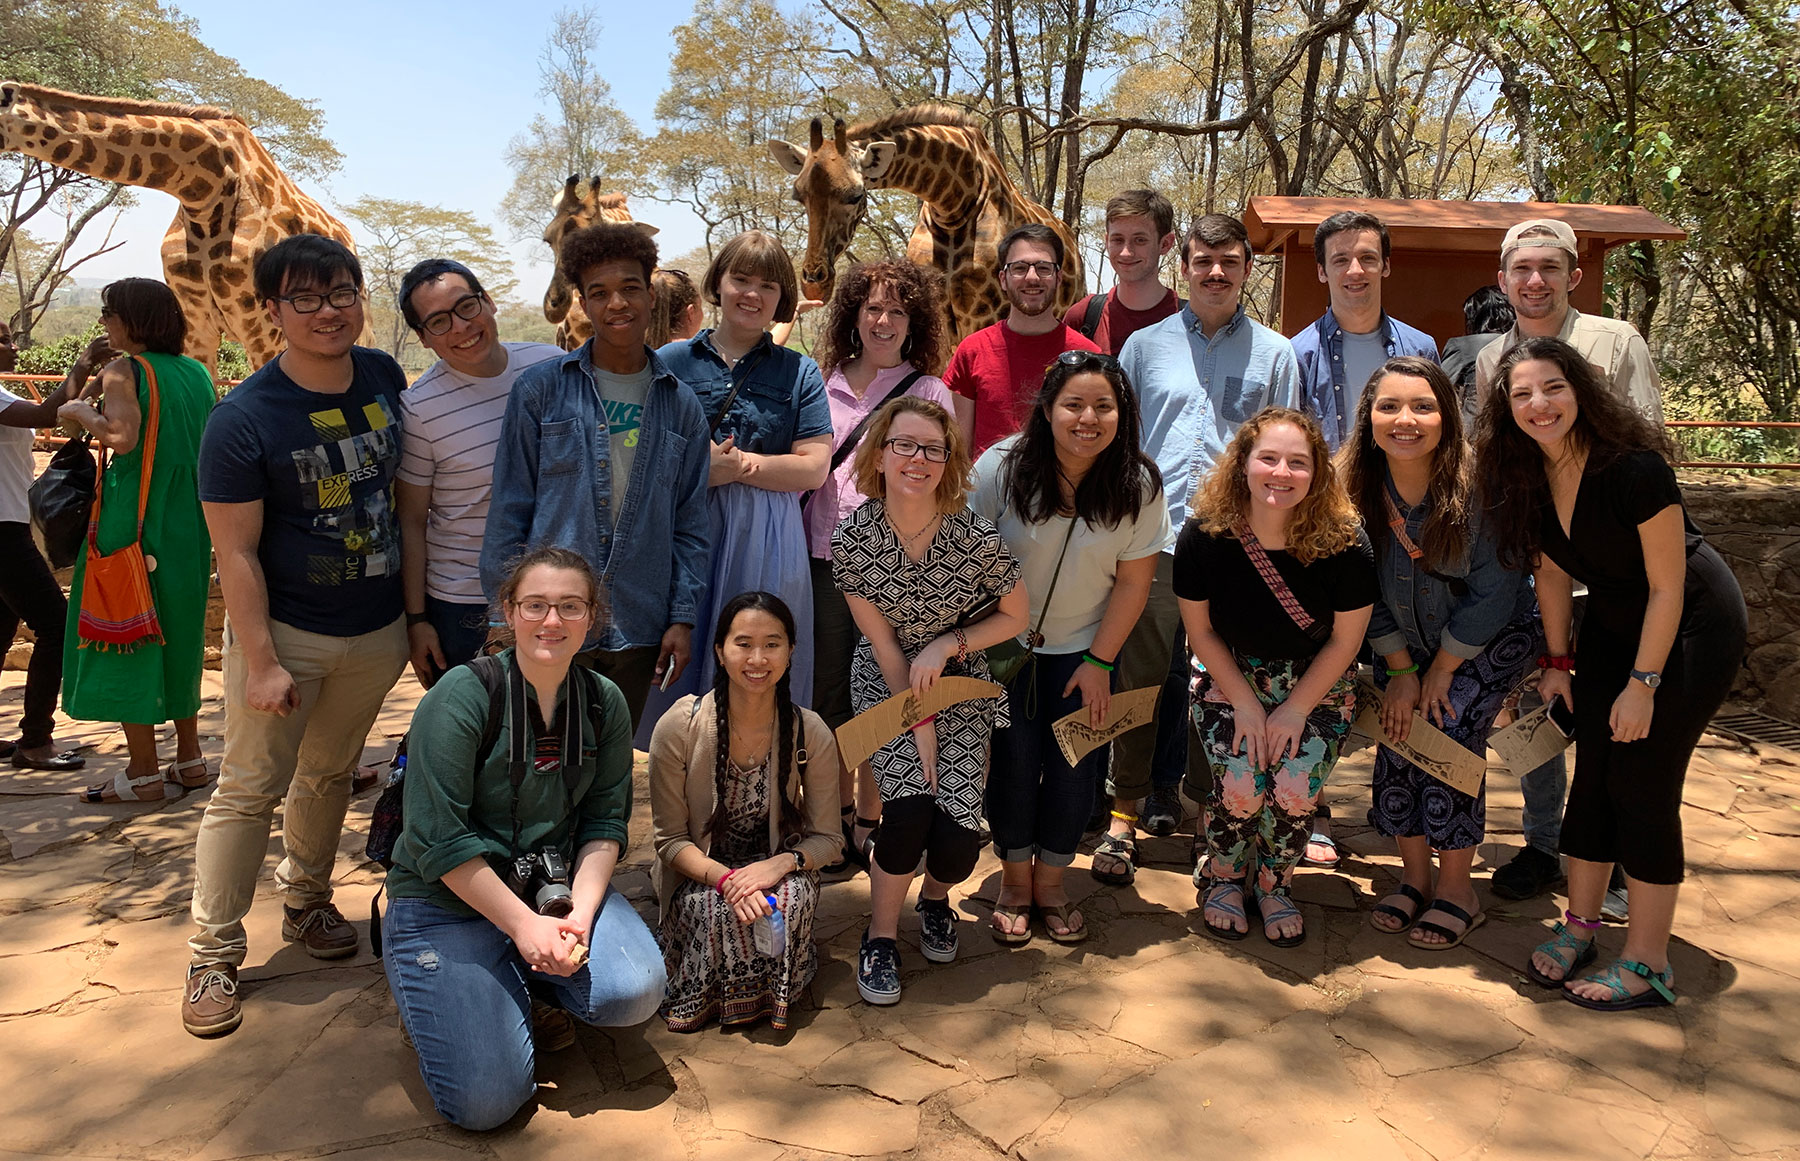 The students visited a Giraffe Center during their trip to Kenya.